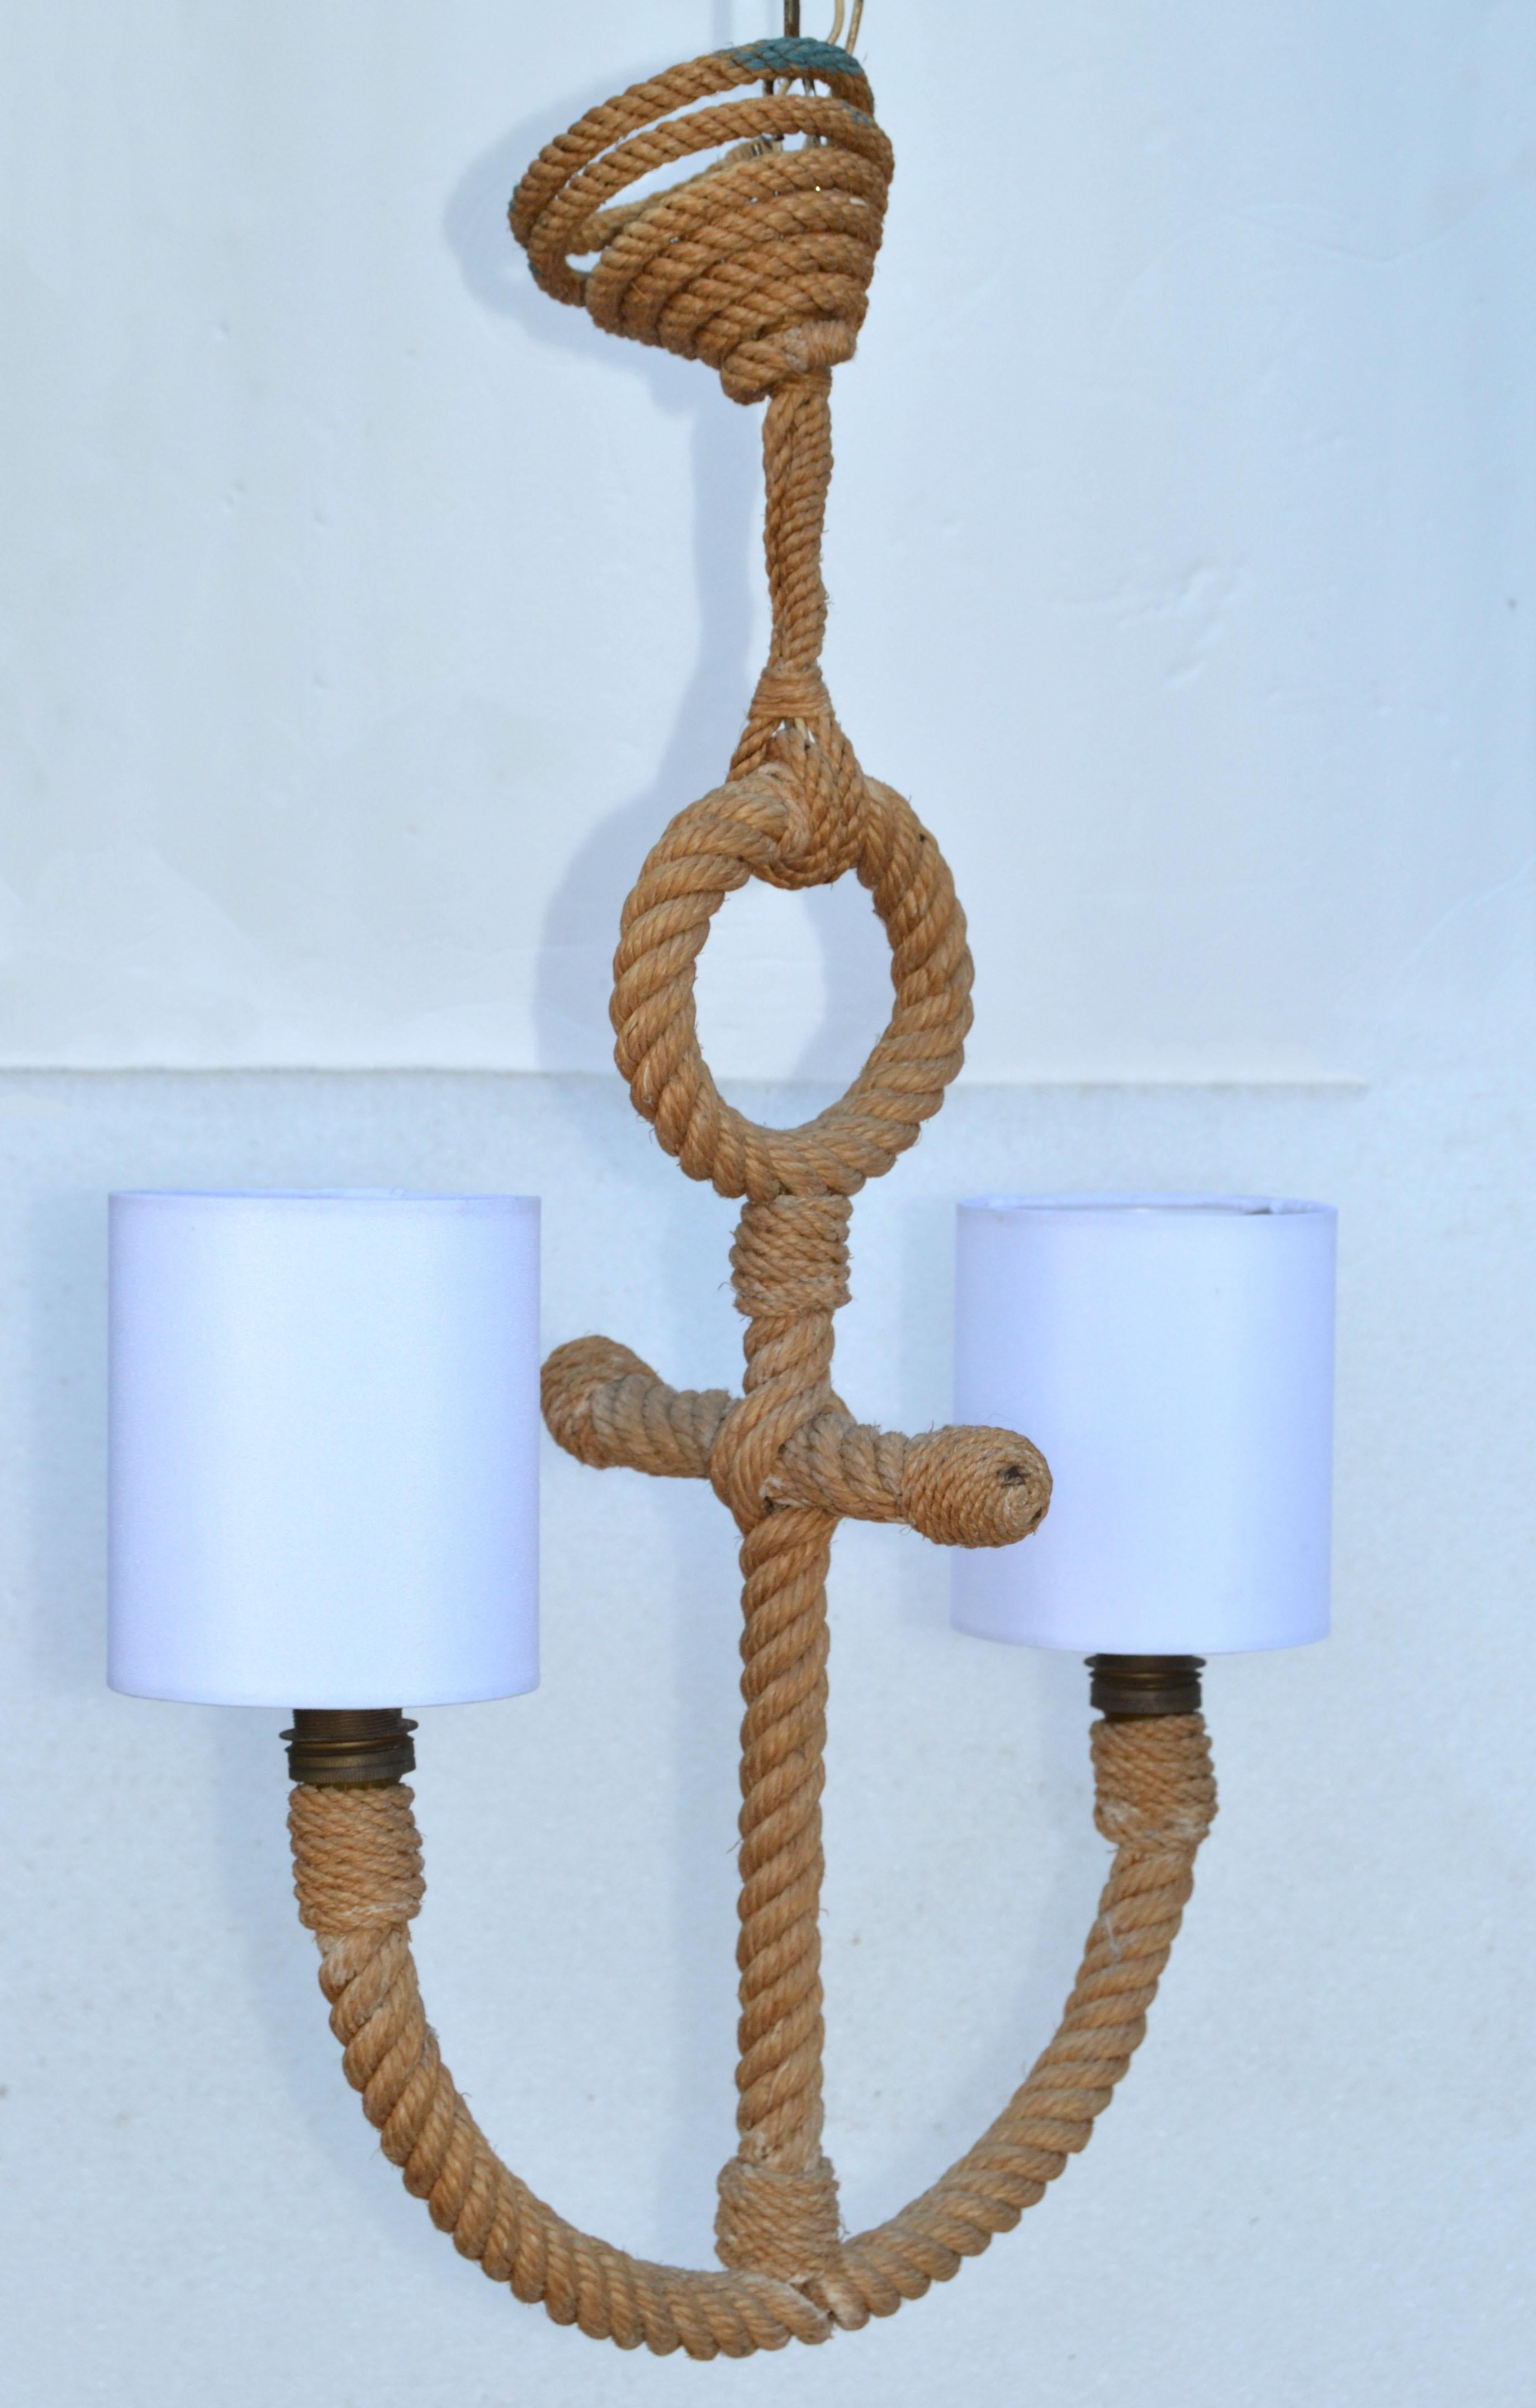 Audoux Minet 2-light French Rope chandelier in a classic Nautical Anchor Design.
Original wiring and takes 2 Torpedo E 14 Light Bulbs with max. 60 watts.
Comes with the white Clip on Shades.
Shades measure: 
Diameter: 4.5 inches x 4 inches